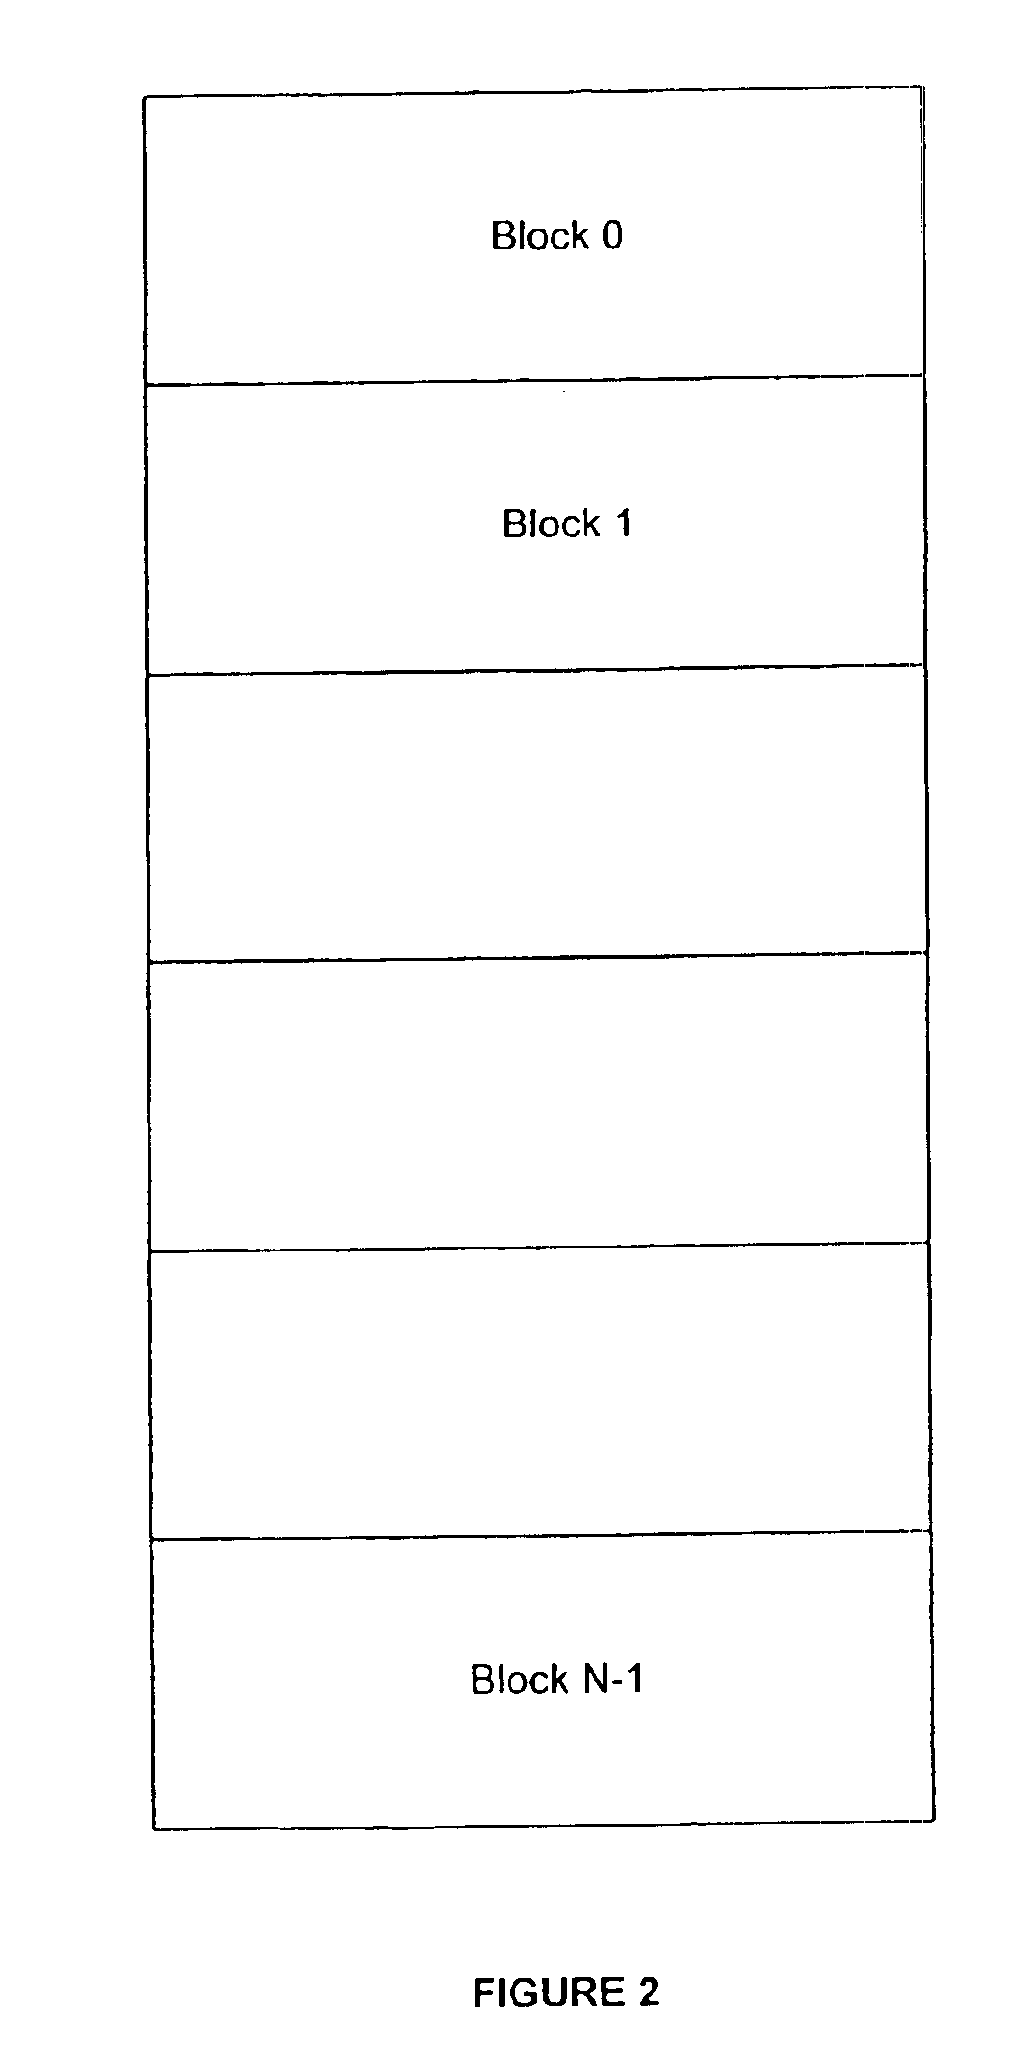 Block device driver enabling a ruggedized file system